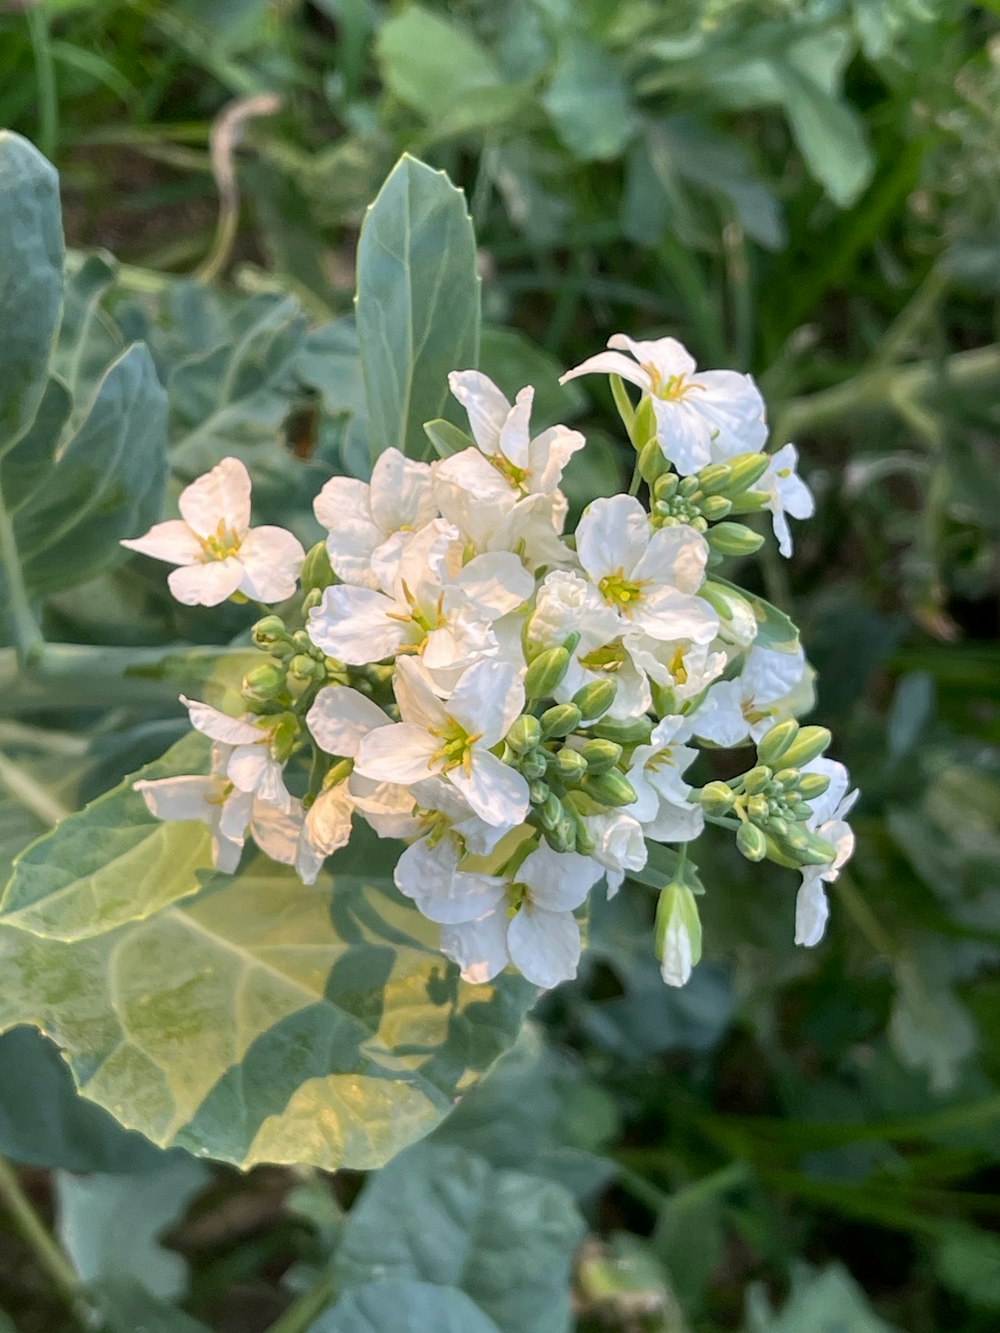 a cluster of white flowers with green leaves